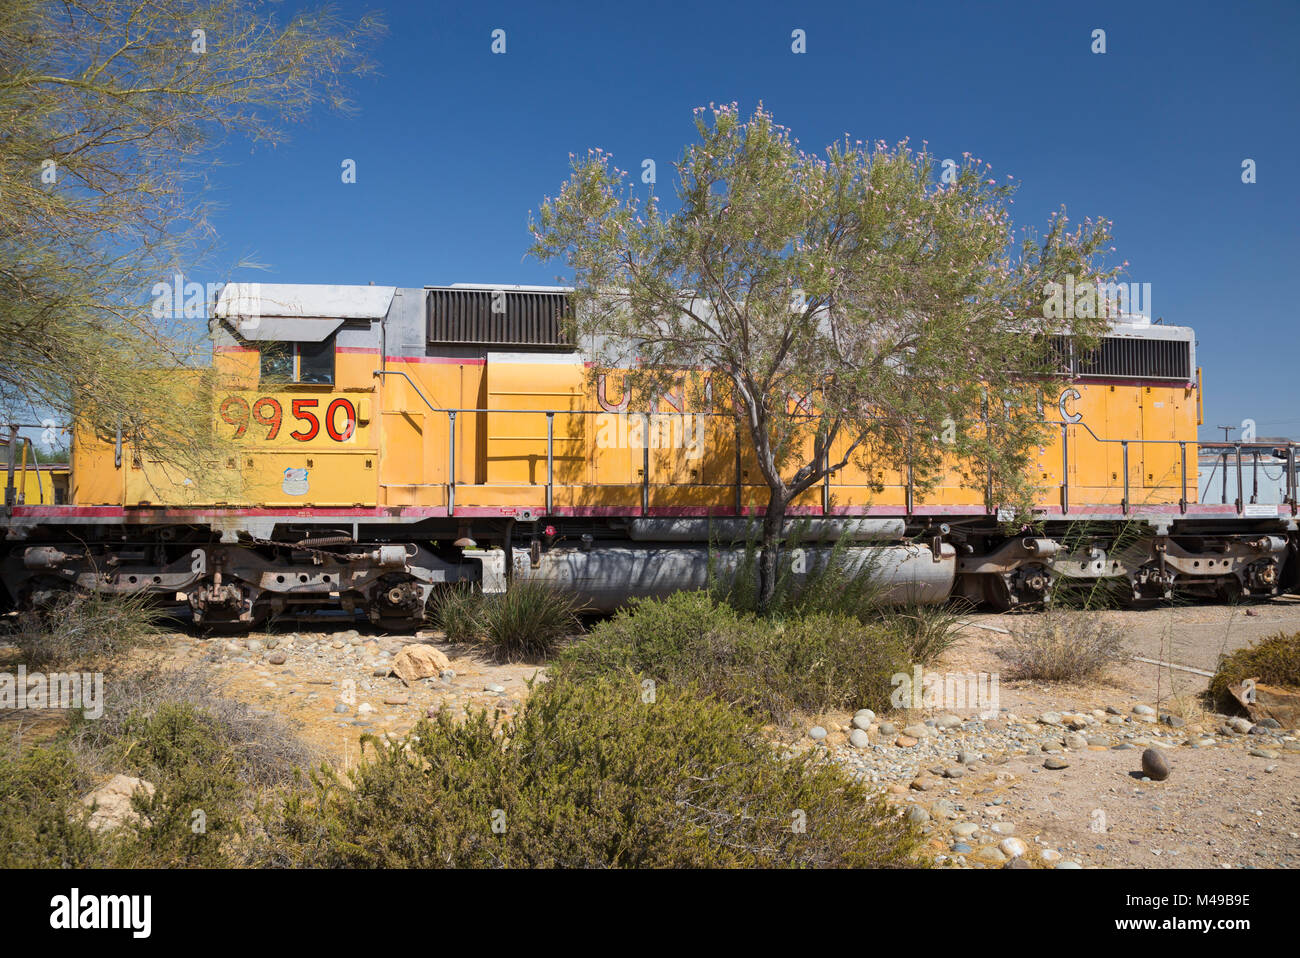 Retired Union Pacific locomotive 9950 at the Western America Railroad Museum, Barstow, California, USA Stock Photo